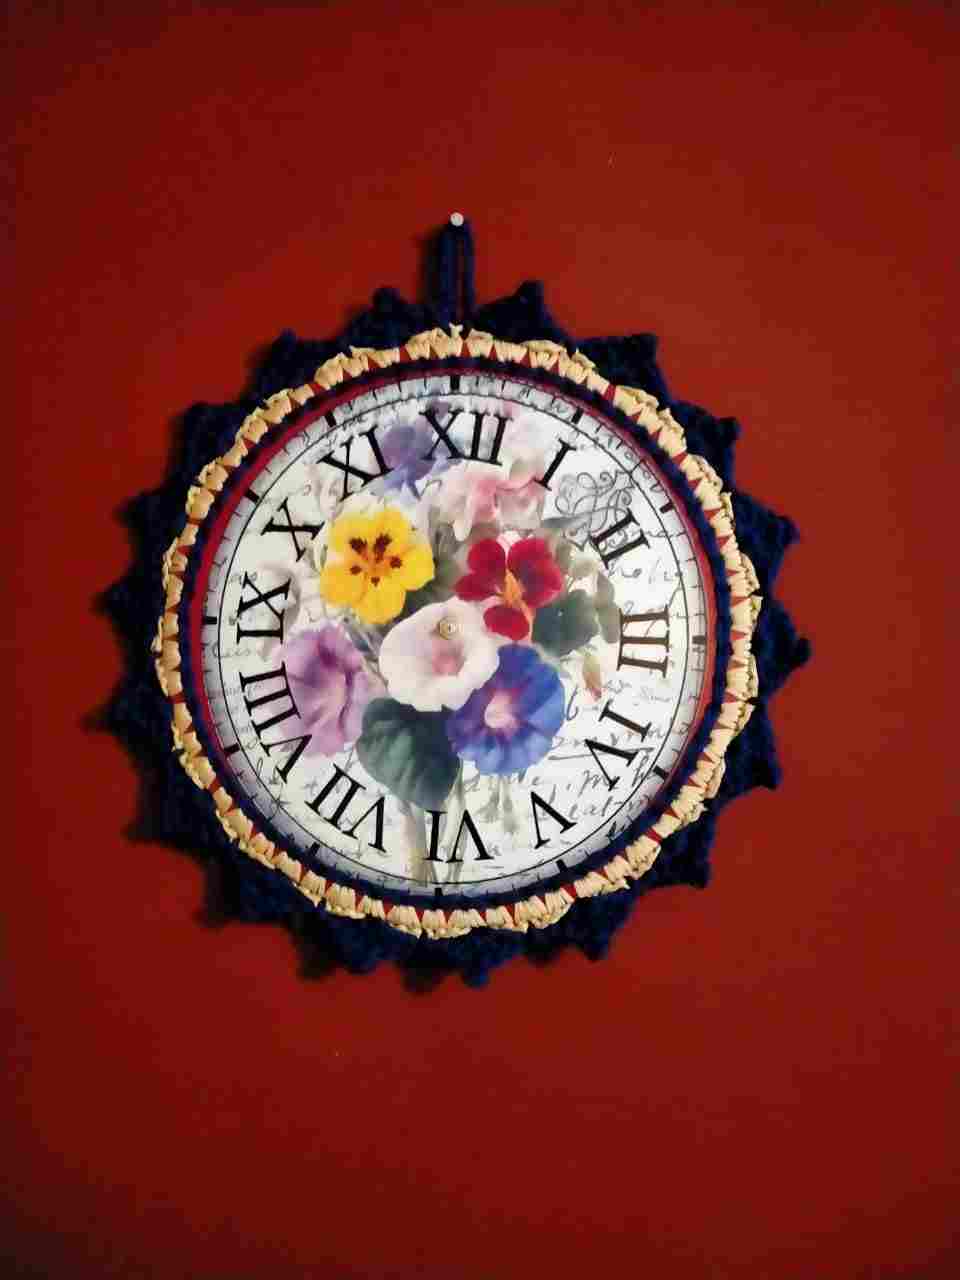 The special watch is embroidered from crochet